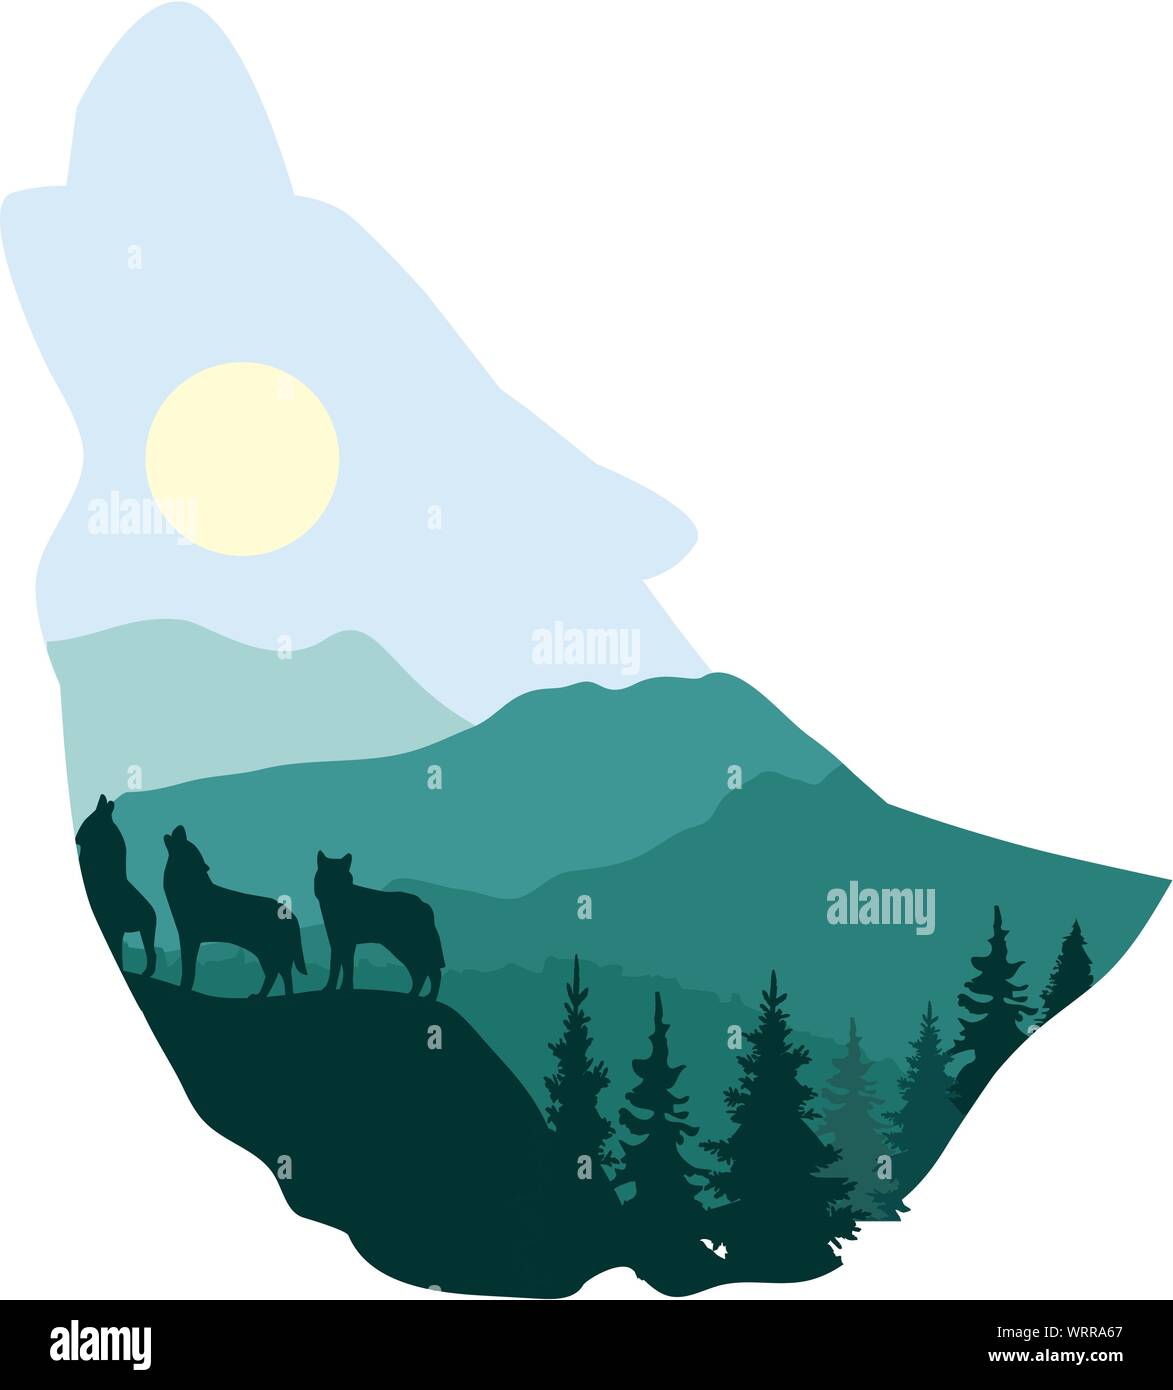 vector illustration of a wolf head silhouette. abstract forest, mountains background. wilderness background. Stock Vector